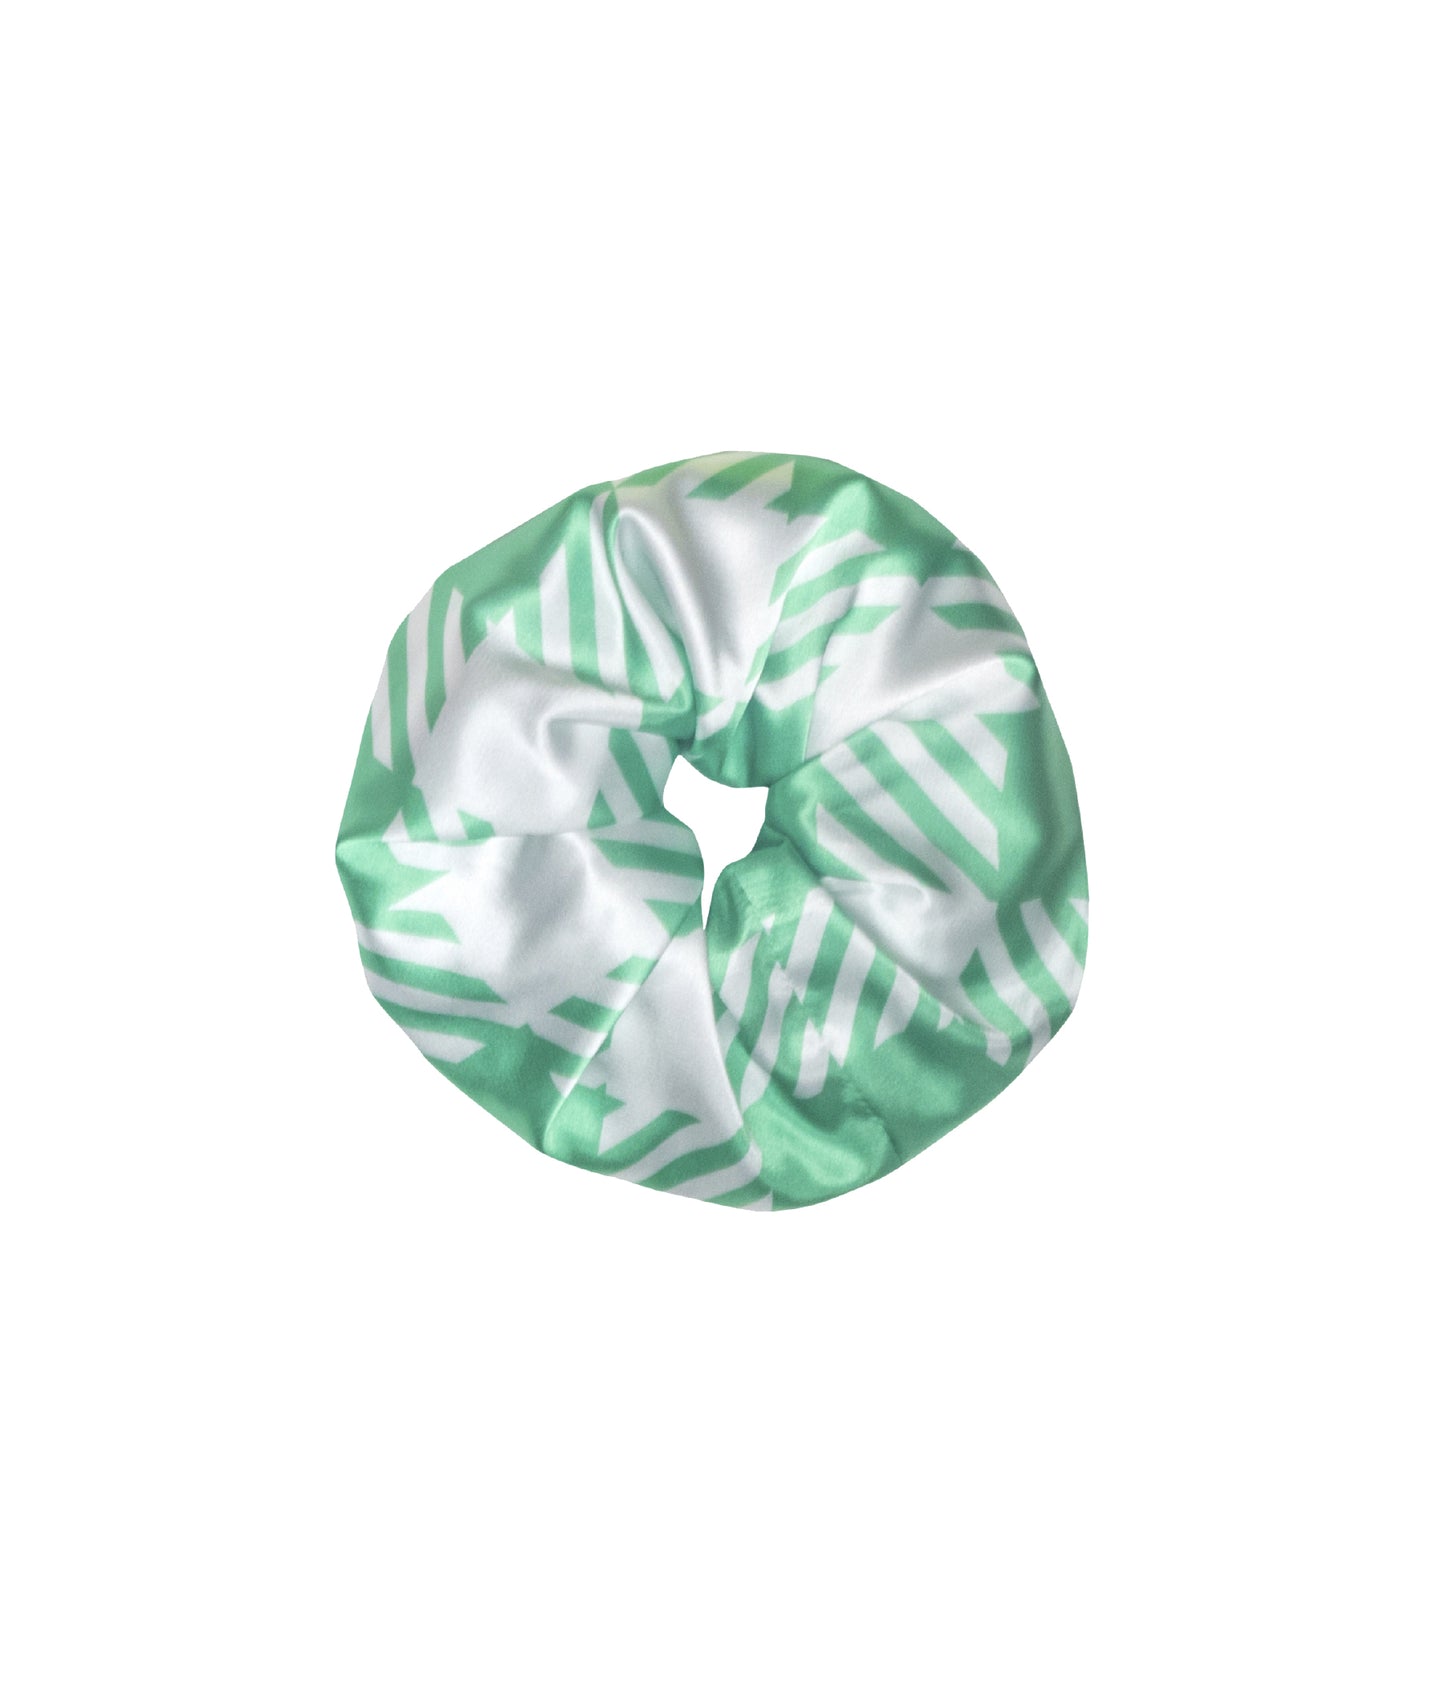 Verdelimon - Accesories - Scrunchie - Printed - Green Squares 